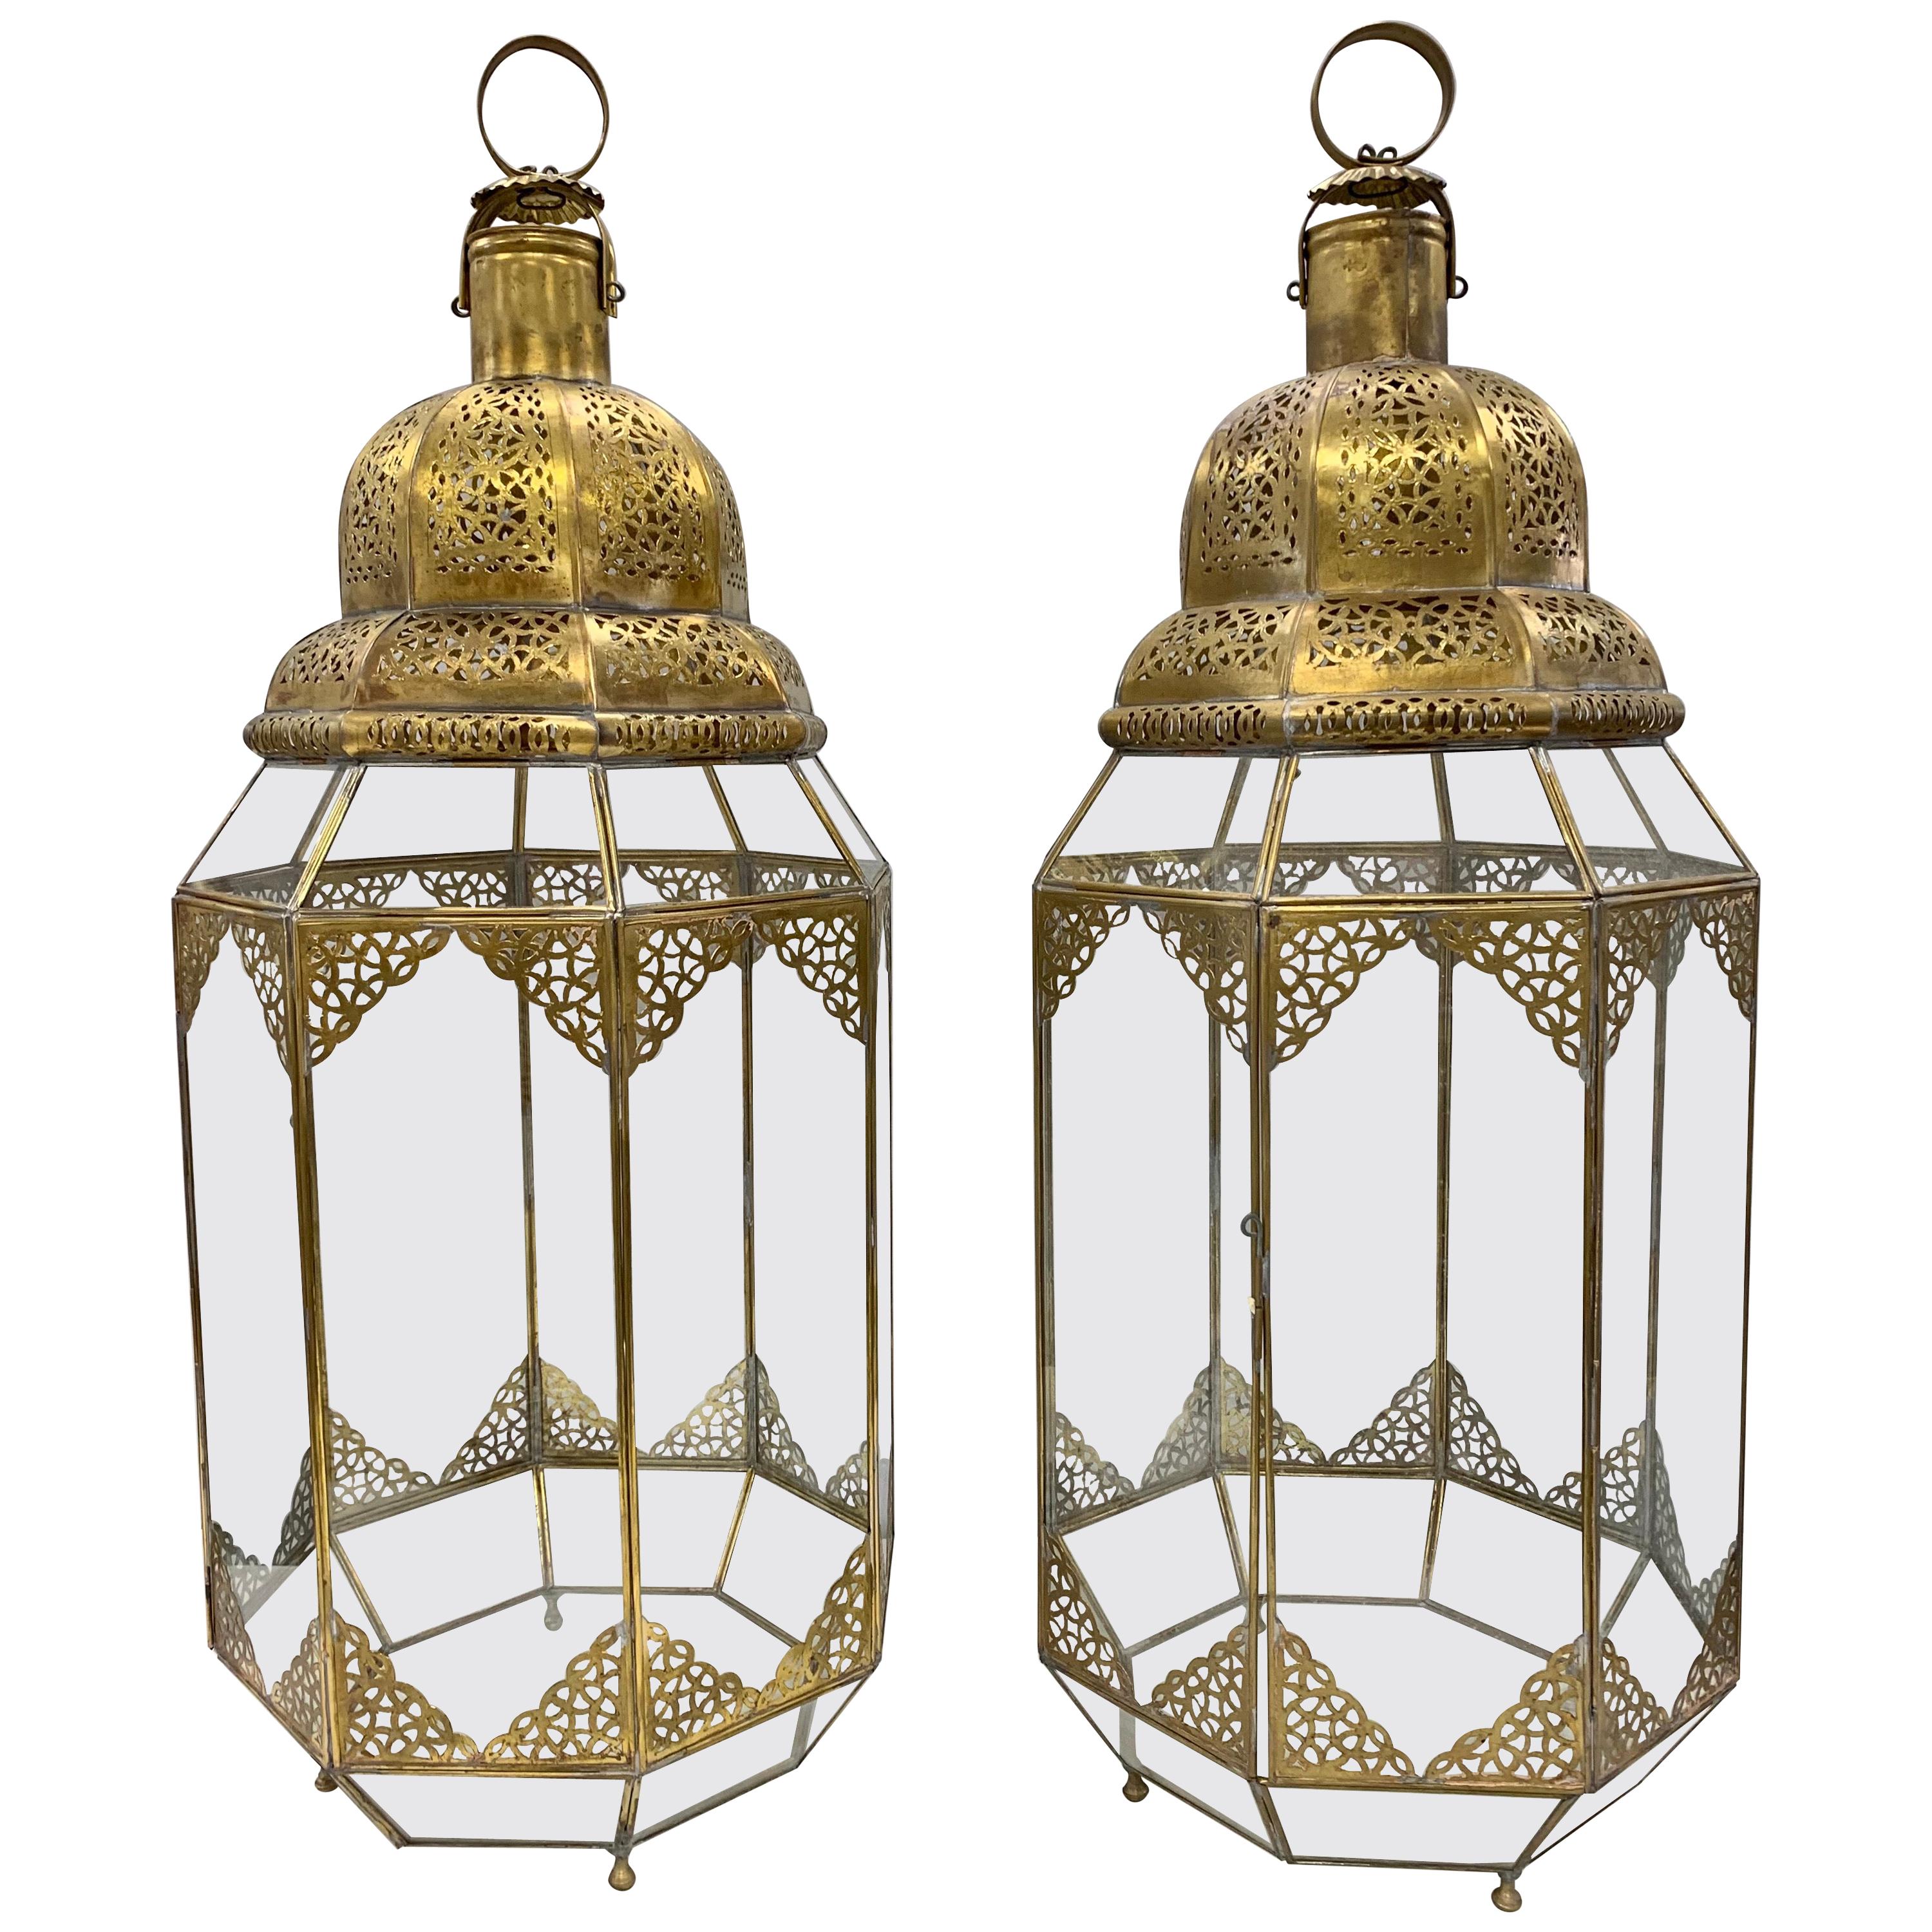 Pr Large Moroccan Moorish Handcrafted Brass and Glass Candle Lanterns Hurricanes